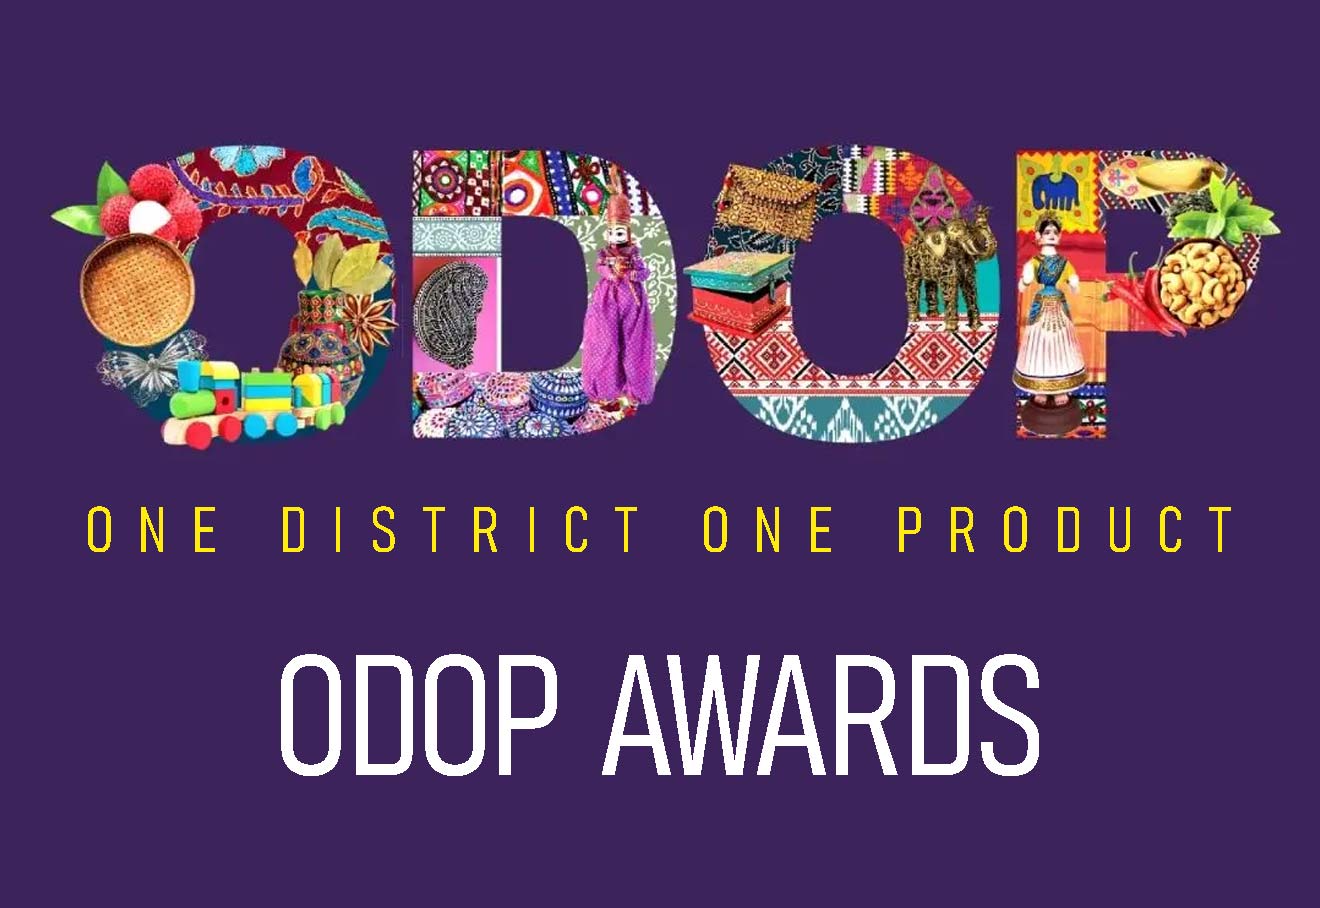 64 Districts Selected For ODOP Award